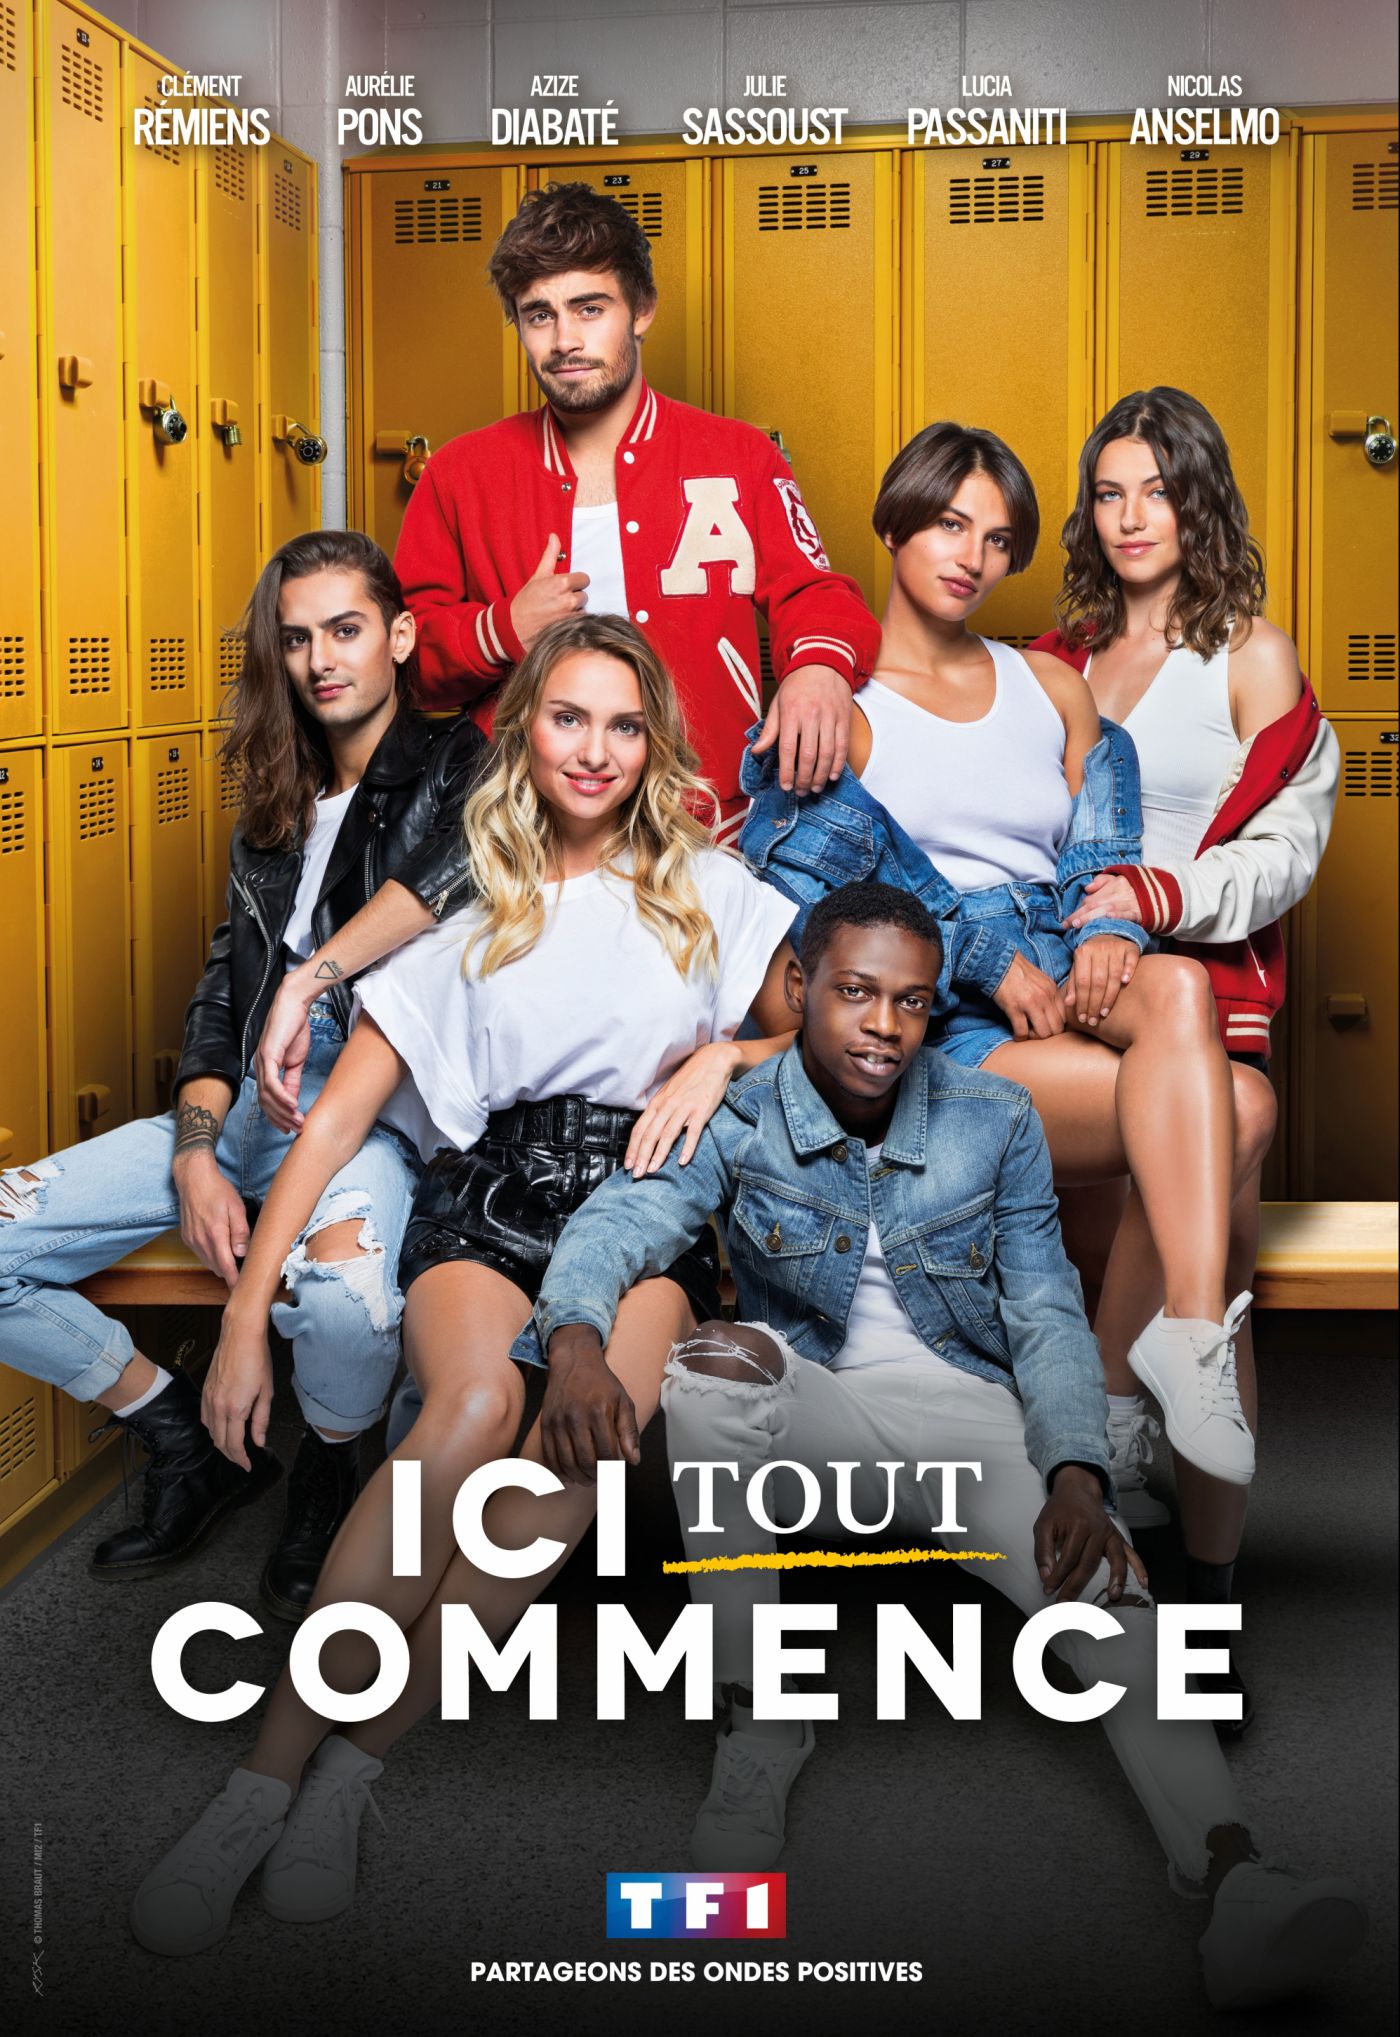 TV ratings for Ici Tout Commence in Tailandia. TF1 TV series